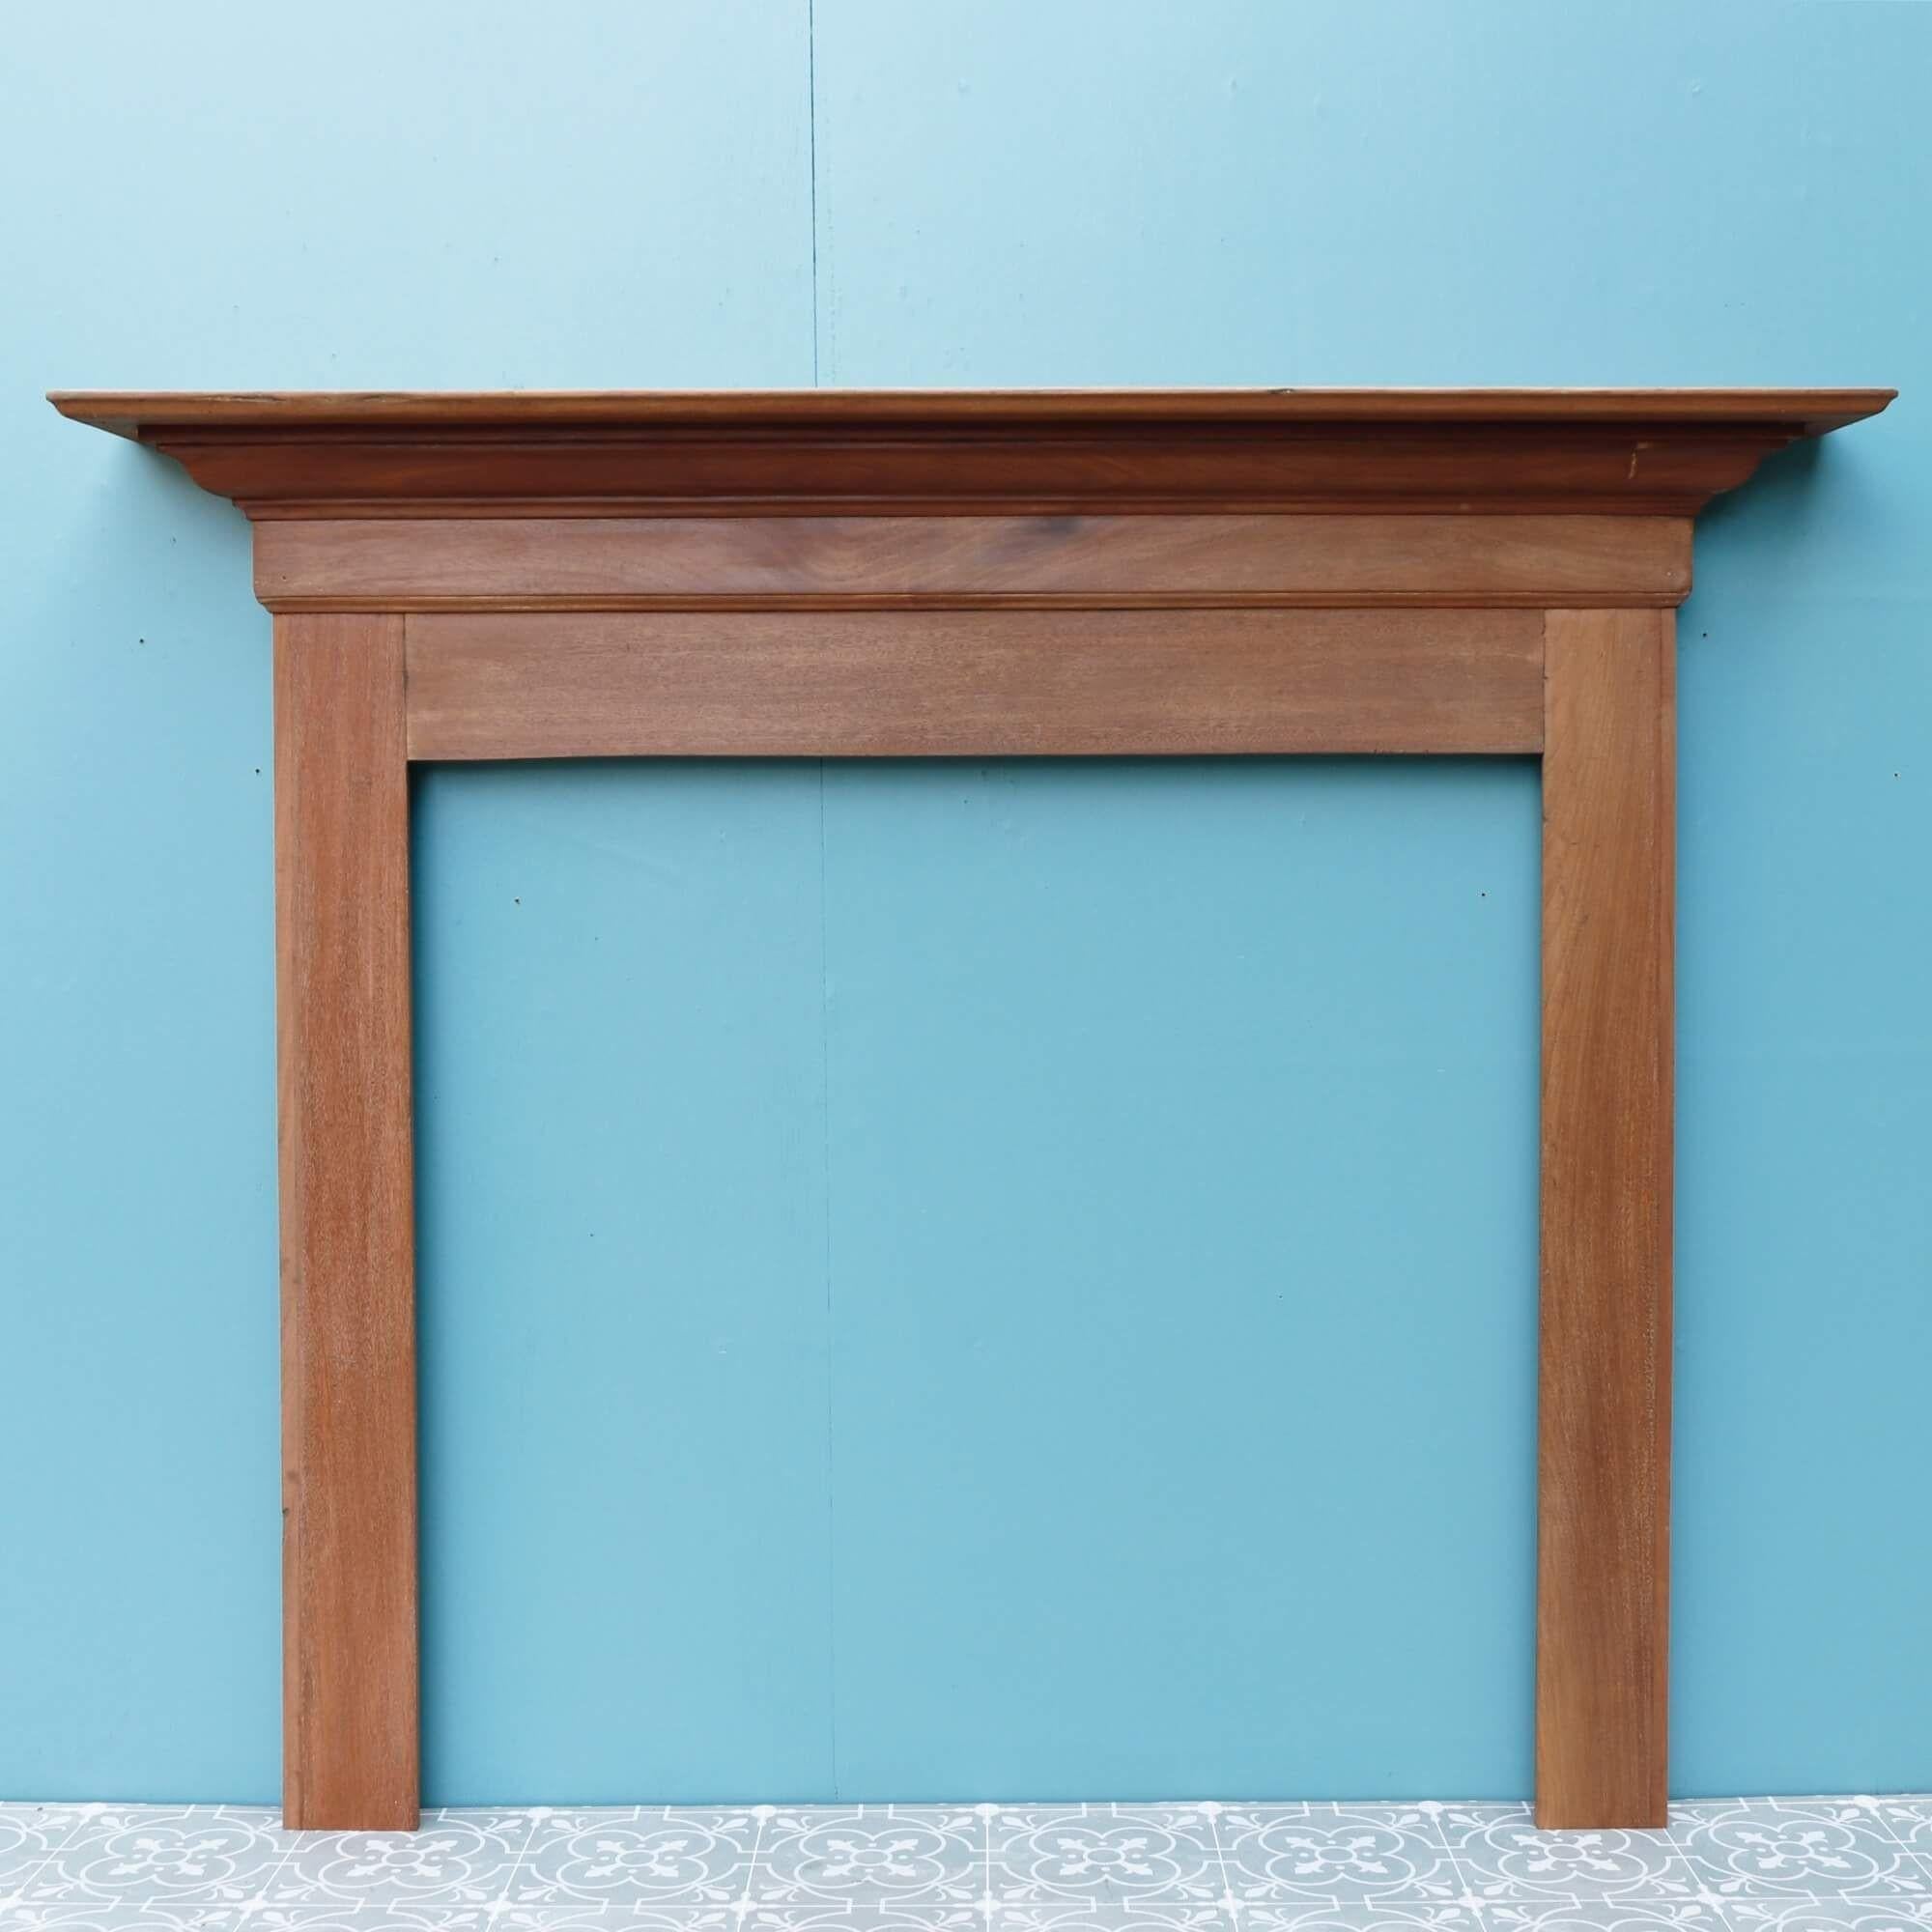 The simple profile of this Victorian mahogany mantel suits contemporary and traditional interiors alike. Dating from the early 20th century, it has a square moulded profile, tapering mantel and simple lines, making for an understated fireplace in